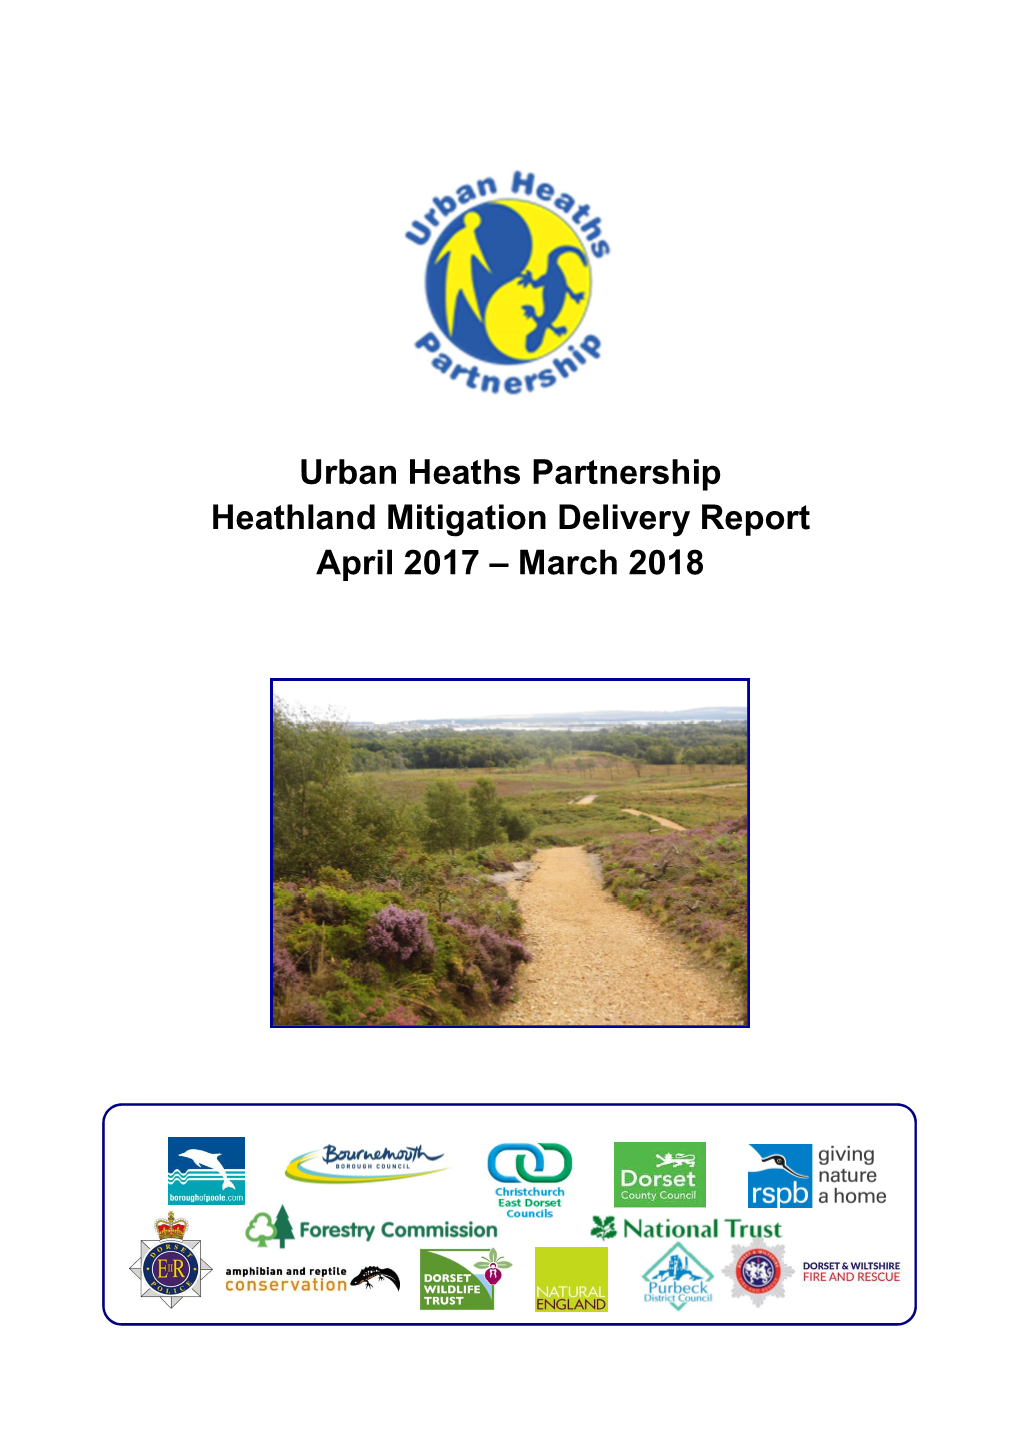 UHP Heathland Mitigation Delivery Report 2017 to 2018